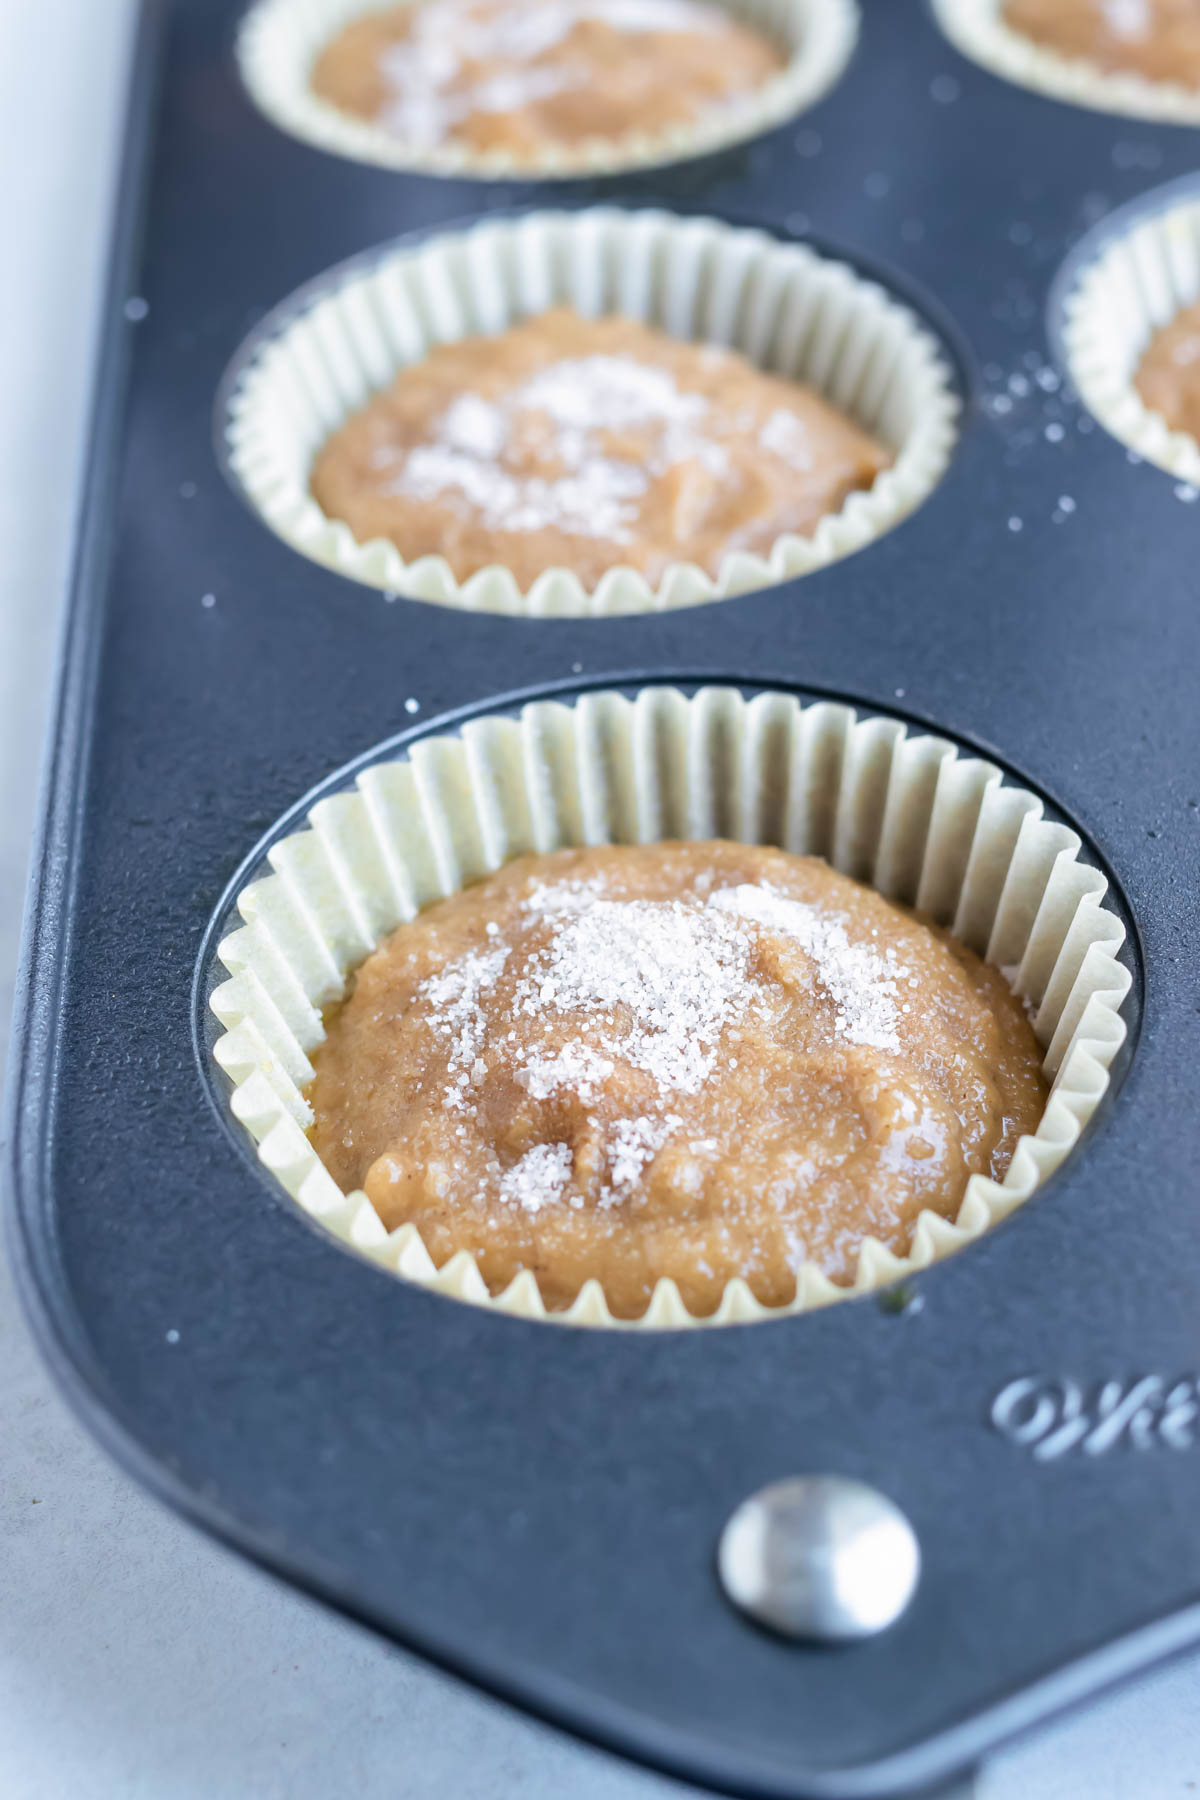 Fill muffin tins with applesauce muffin batter for a quick and easy breakfast.